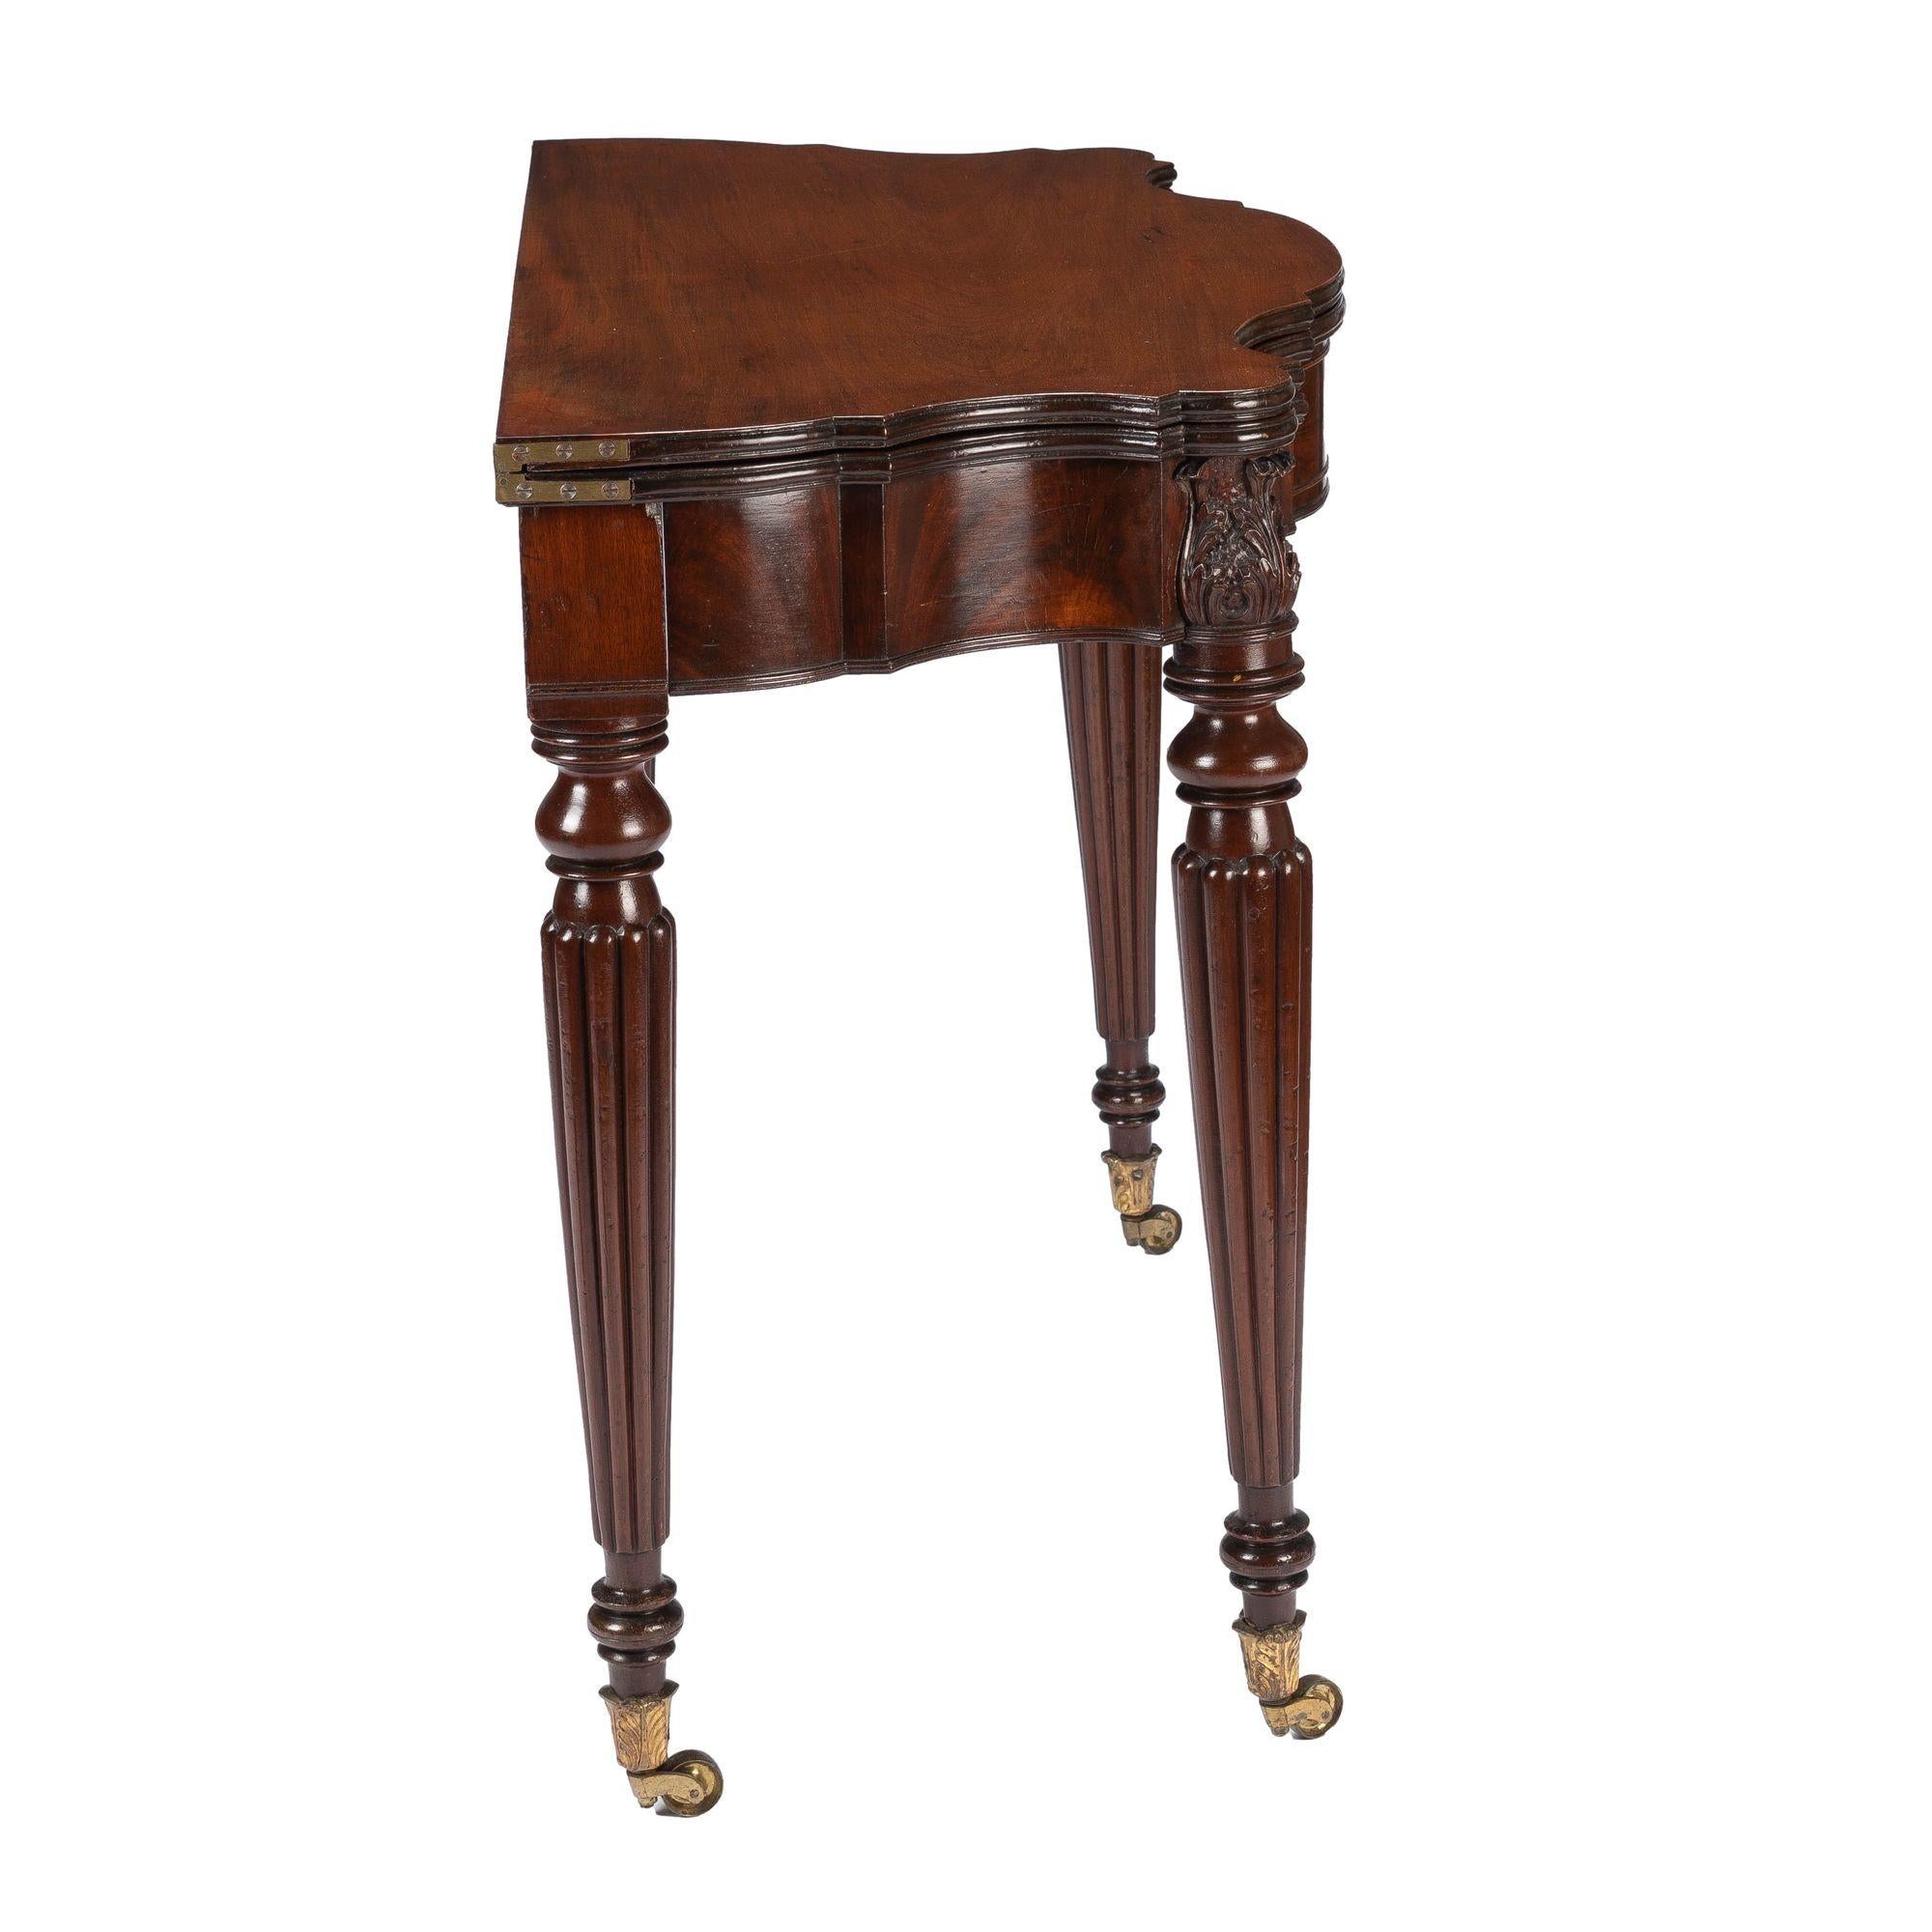 Samuel Field Macintire Attributed Mahogany Flip Top Game Table, c. 1810-15 For Sale 1